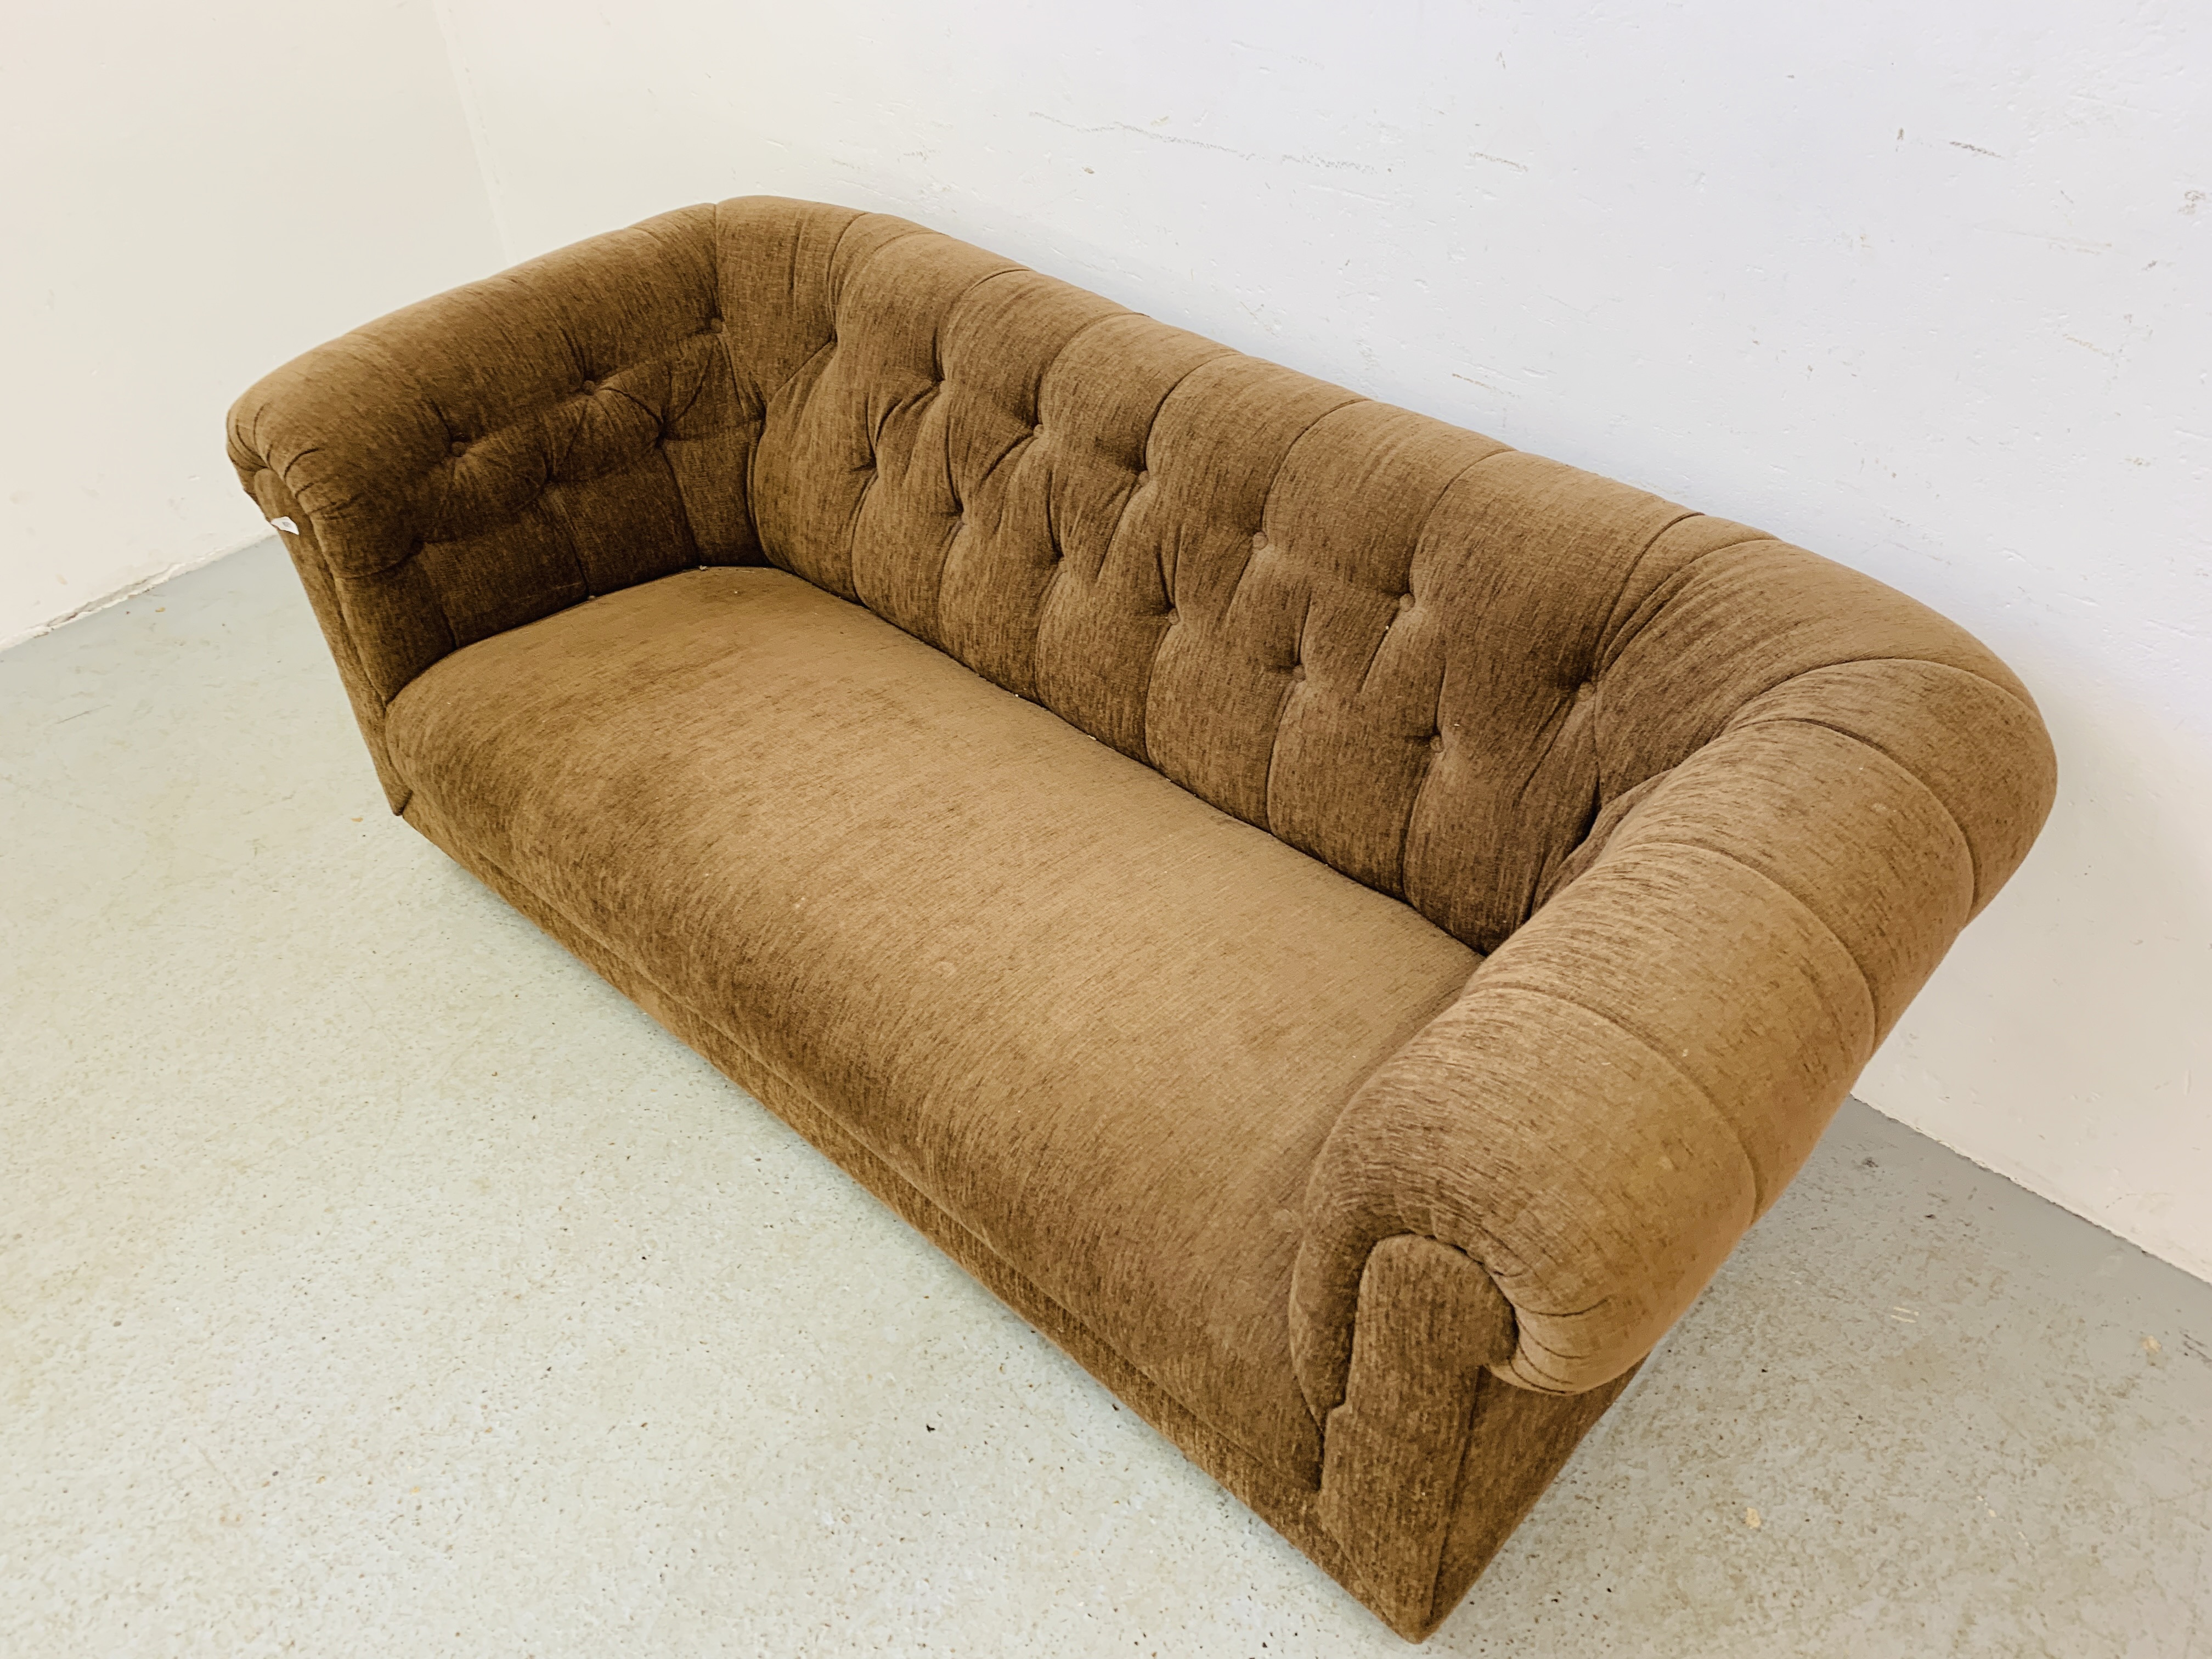 A MODERN BROWN CHESTERFIELD STYLE BUTTON BACK SOFA. L 195CM. D 92CM. H 75CM. - Image 3 of 8